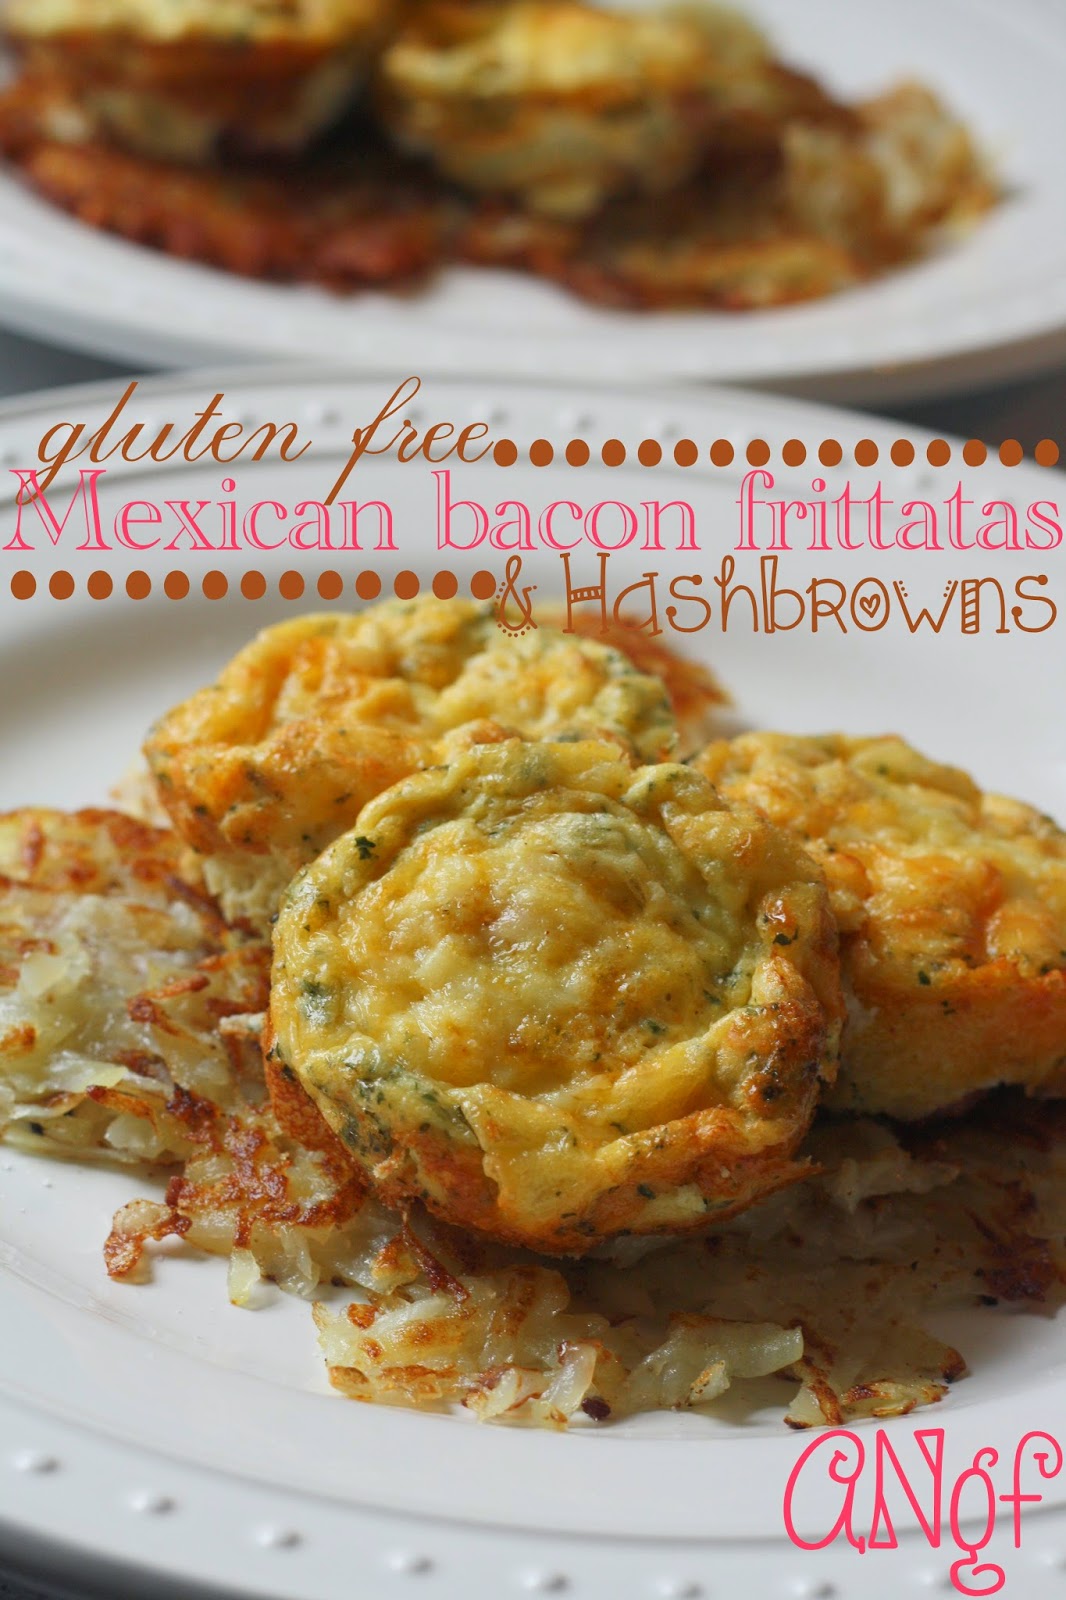 Gluten Free Mexican Bacon Frittatas and Homemade Hashbrowns from Anyonita-nibbles.co.uk